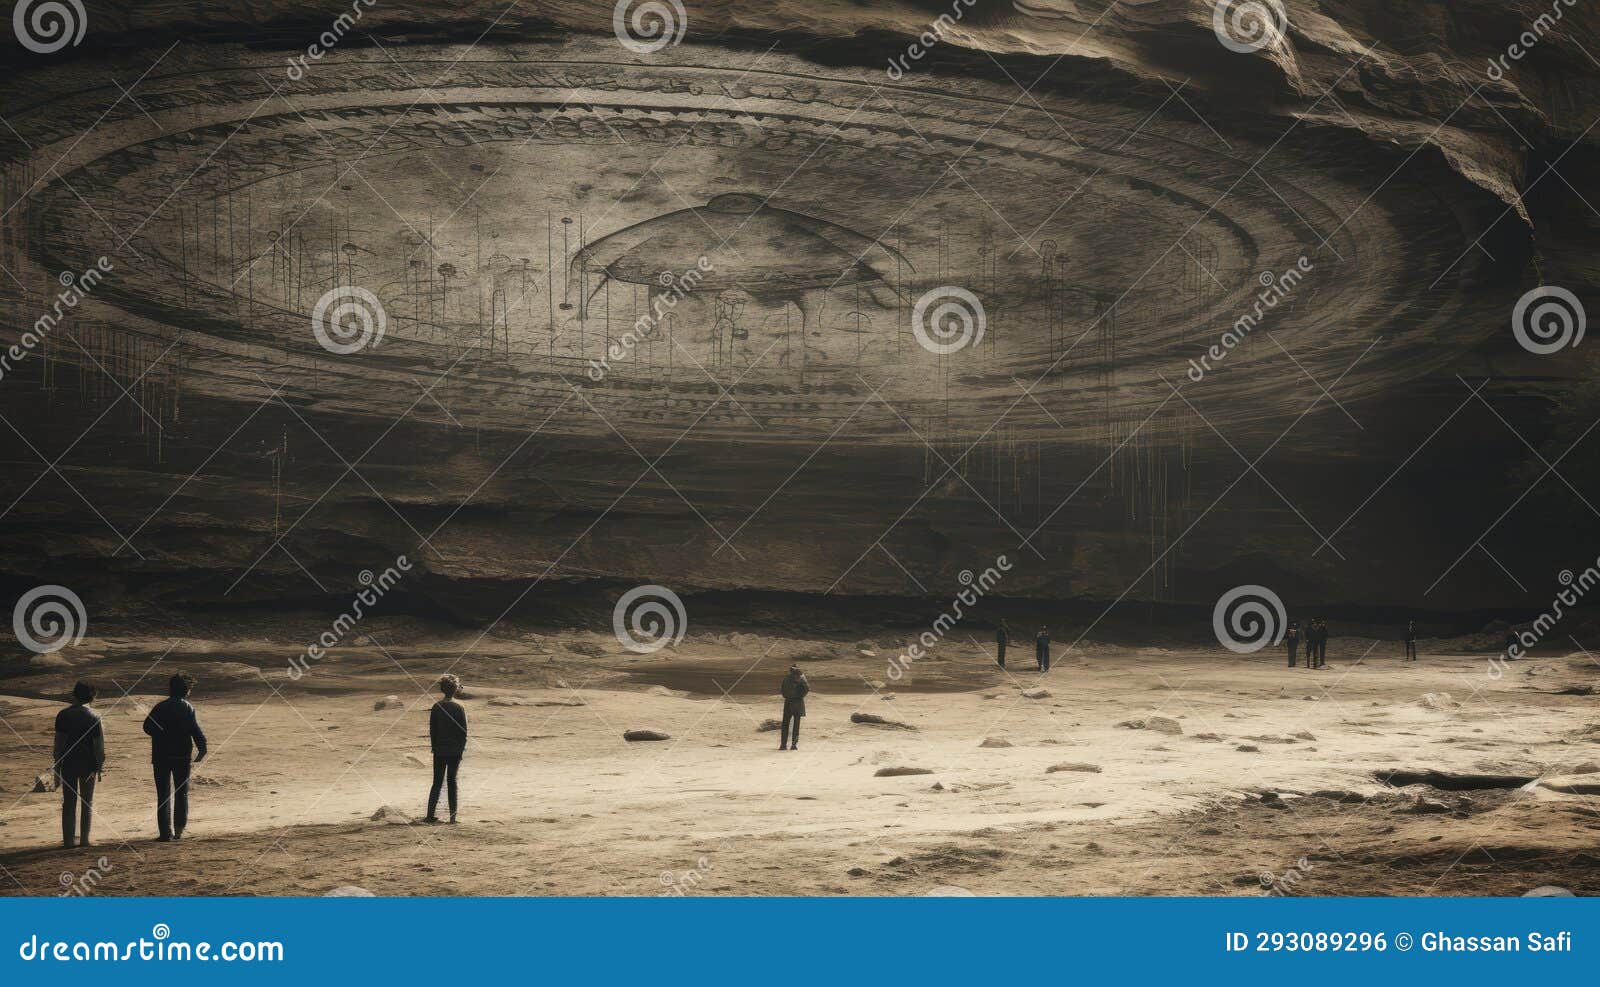 people looking at an ancient alien circular craft carved in a rocky enclave